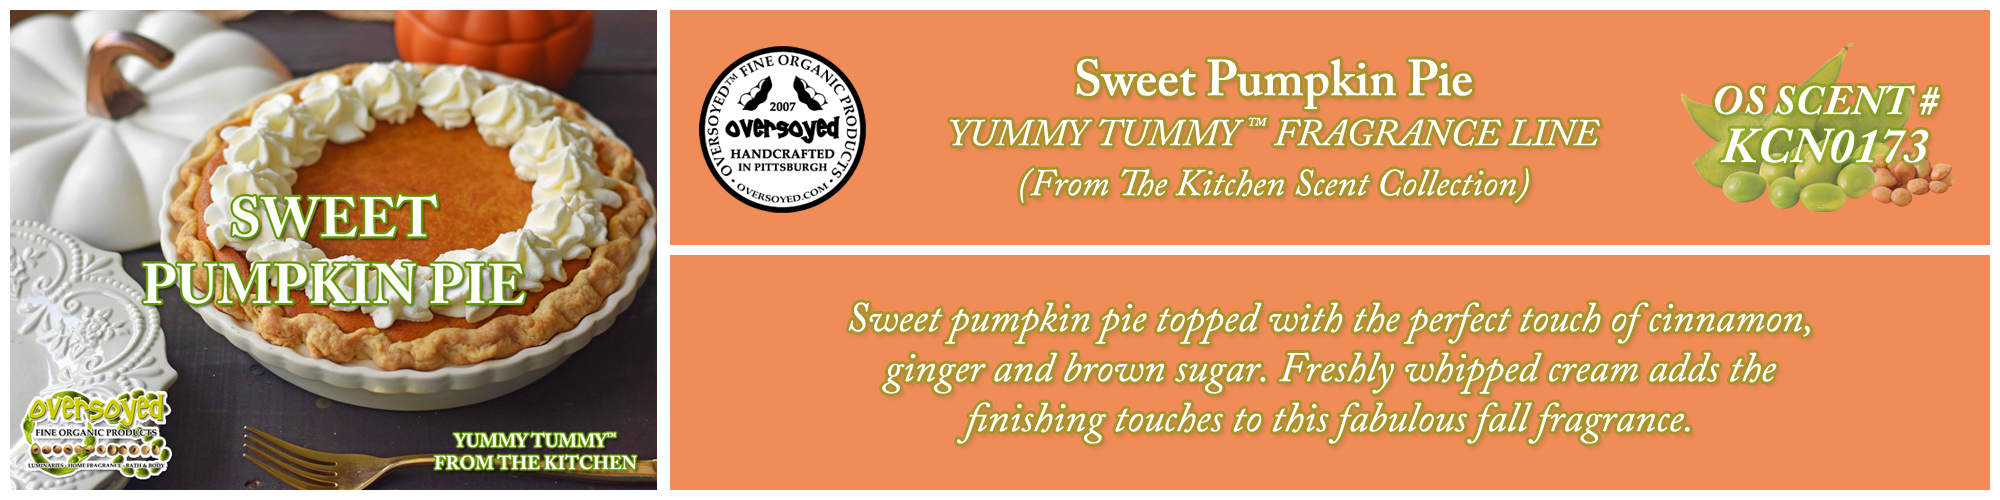 Sweet Pumpkin Pie Handcrafted Products Collection